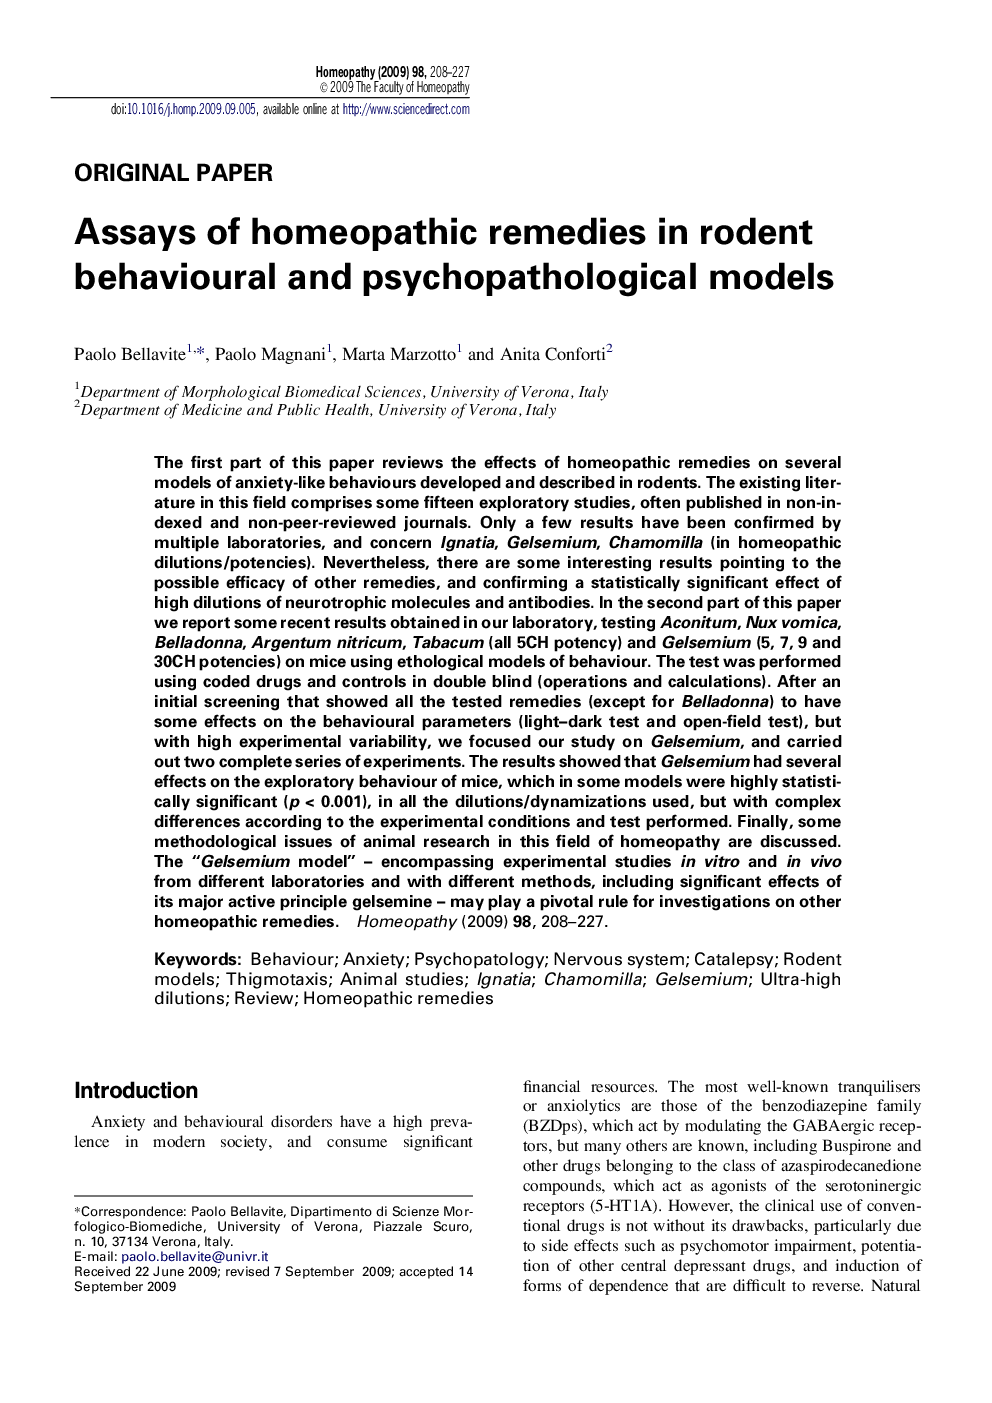 Assays of homeopathic remedies in rodent behavioural and psychopathological models